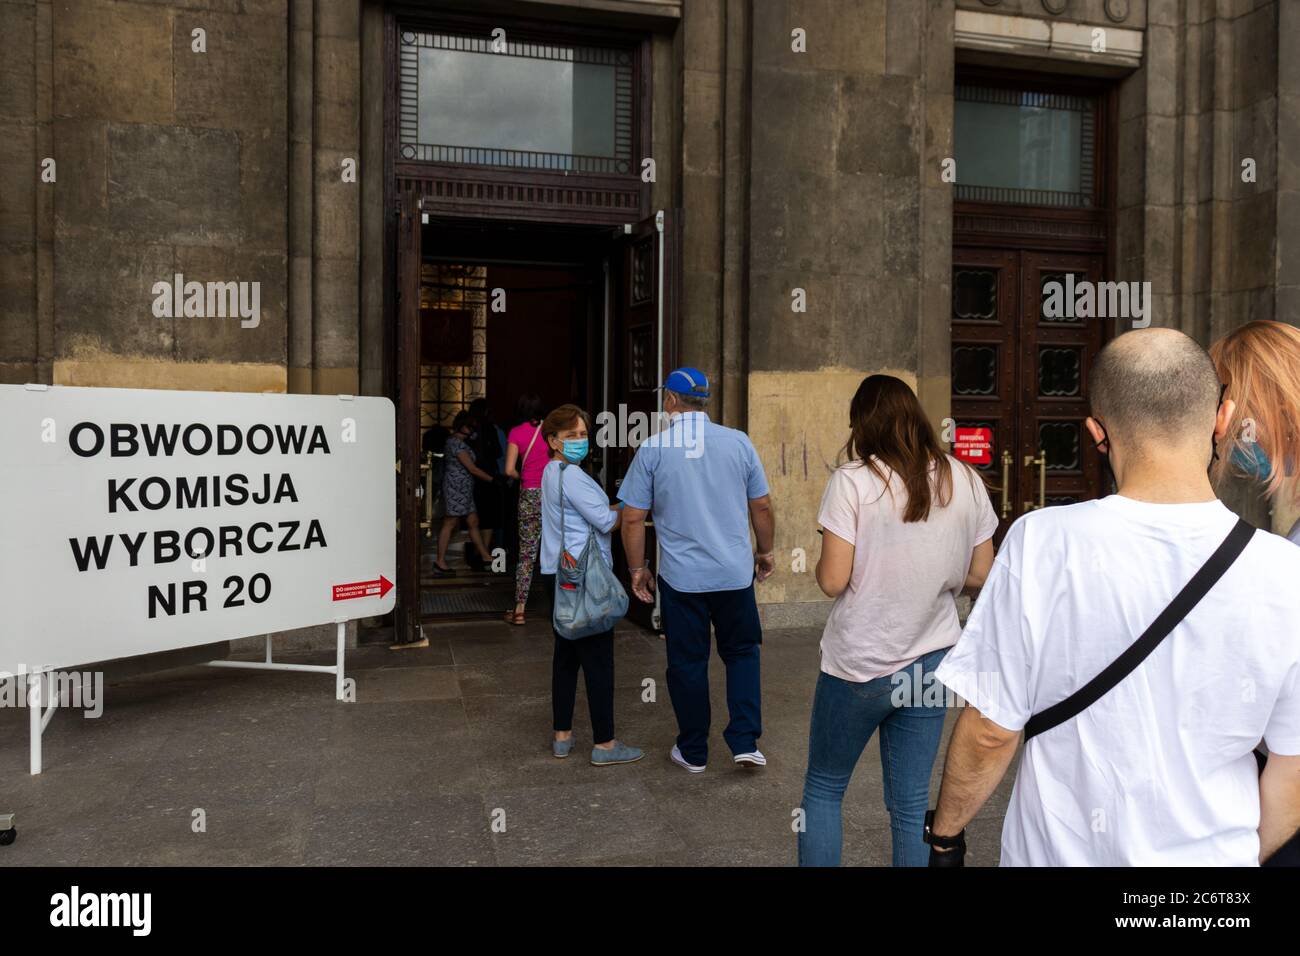 Warsaw, Poland. 12th Jul, 2020. People waiting to vote in central Warsaw. Poland decides today if the president will be the actual conservative president Andrzej Duda or the mayor of Warsaw Rafal Trzakowski. Credit: Dino Geromella / Alamy Live News Stock Photo